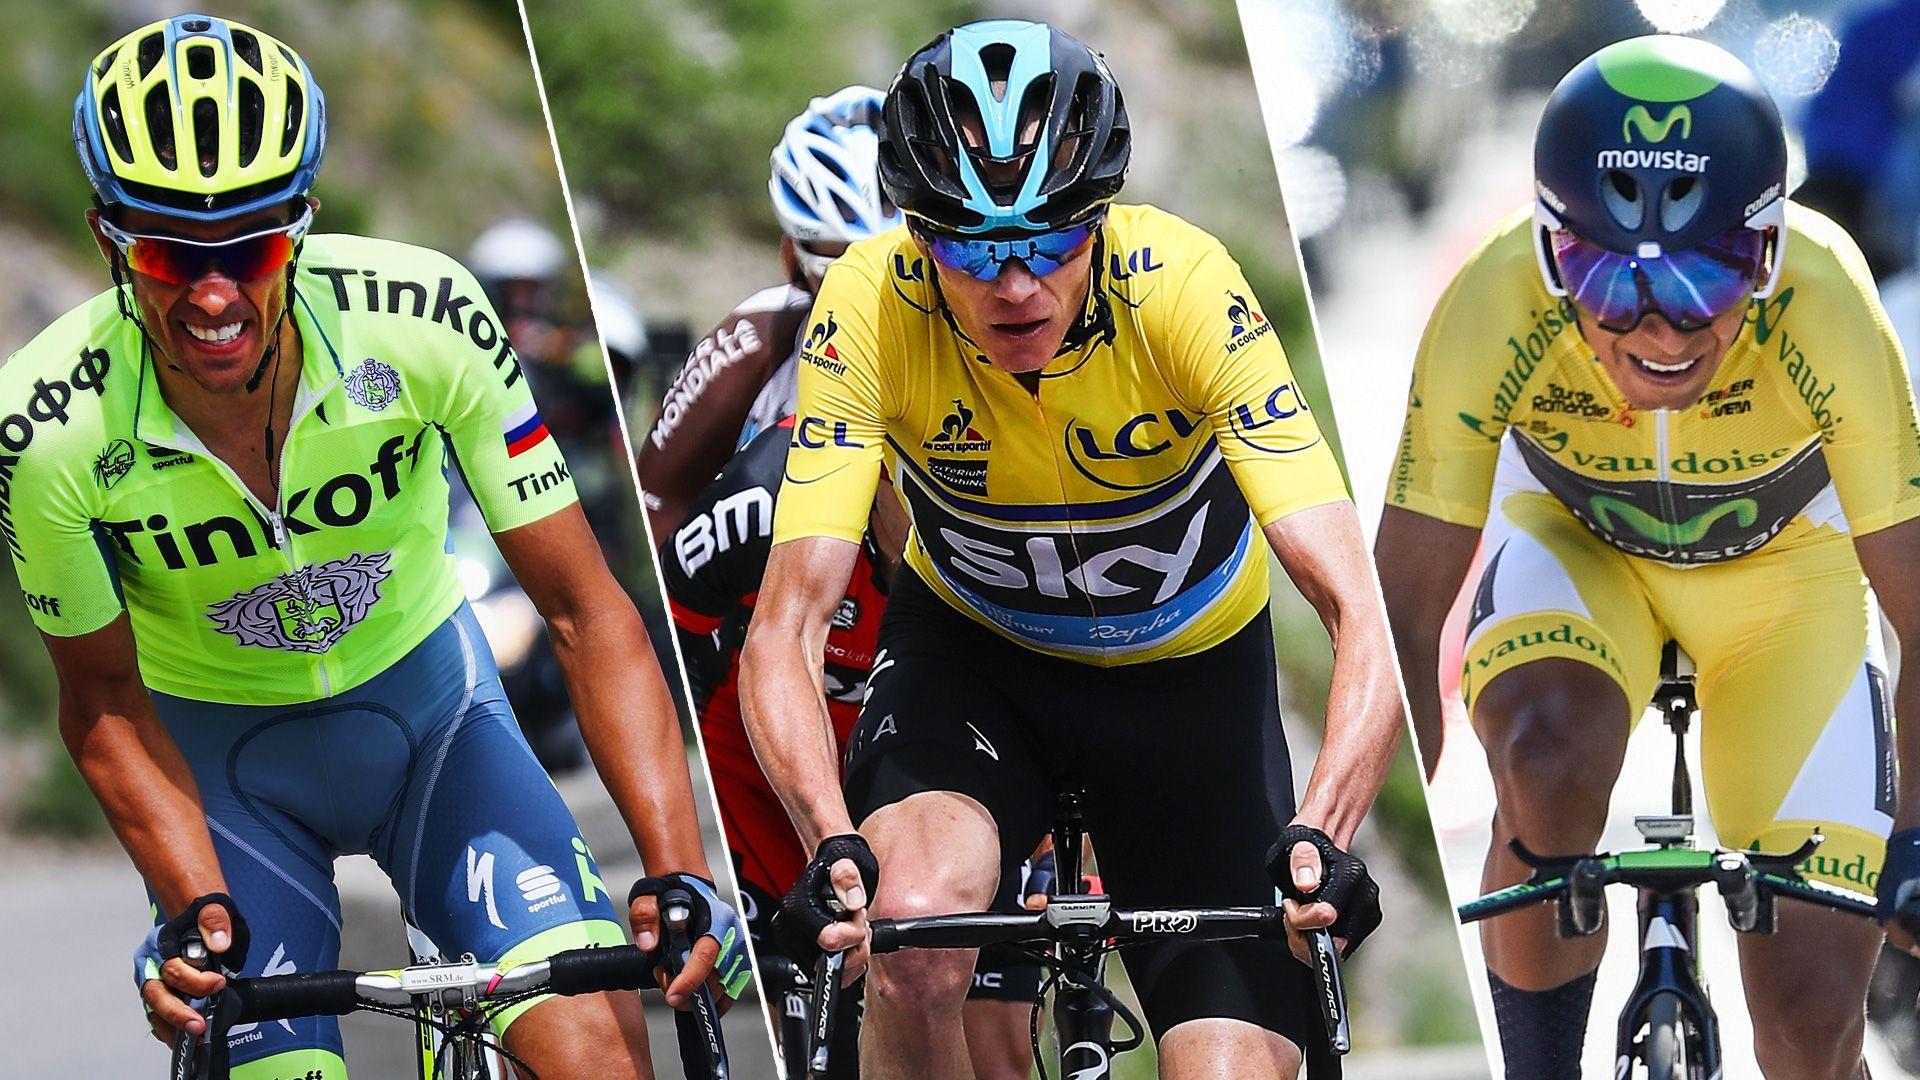 Tour de France 2016: Contenders, teams, riders. Other Sports